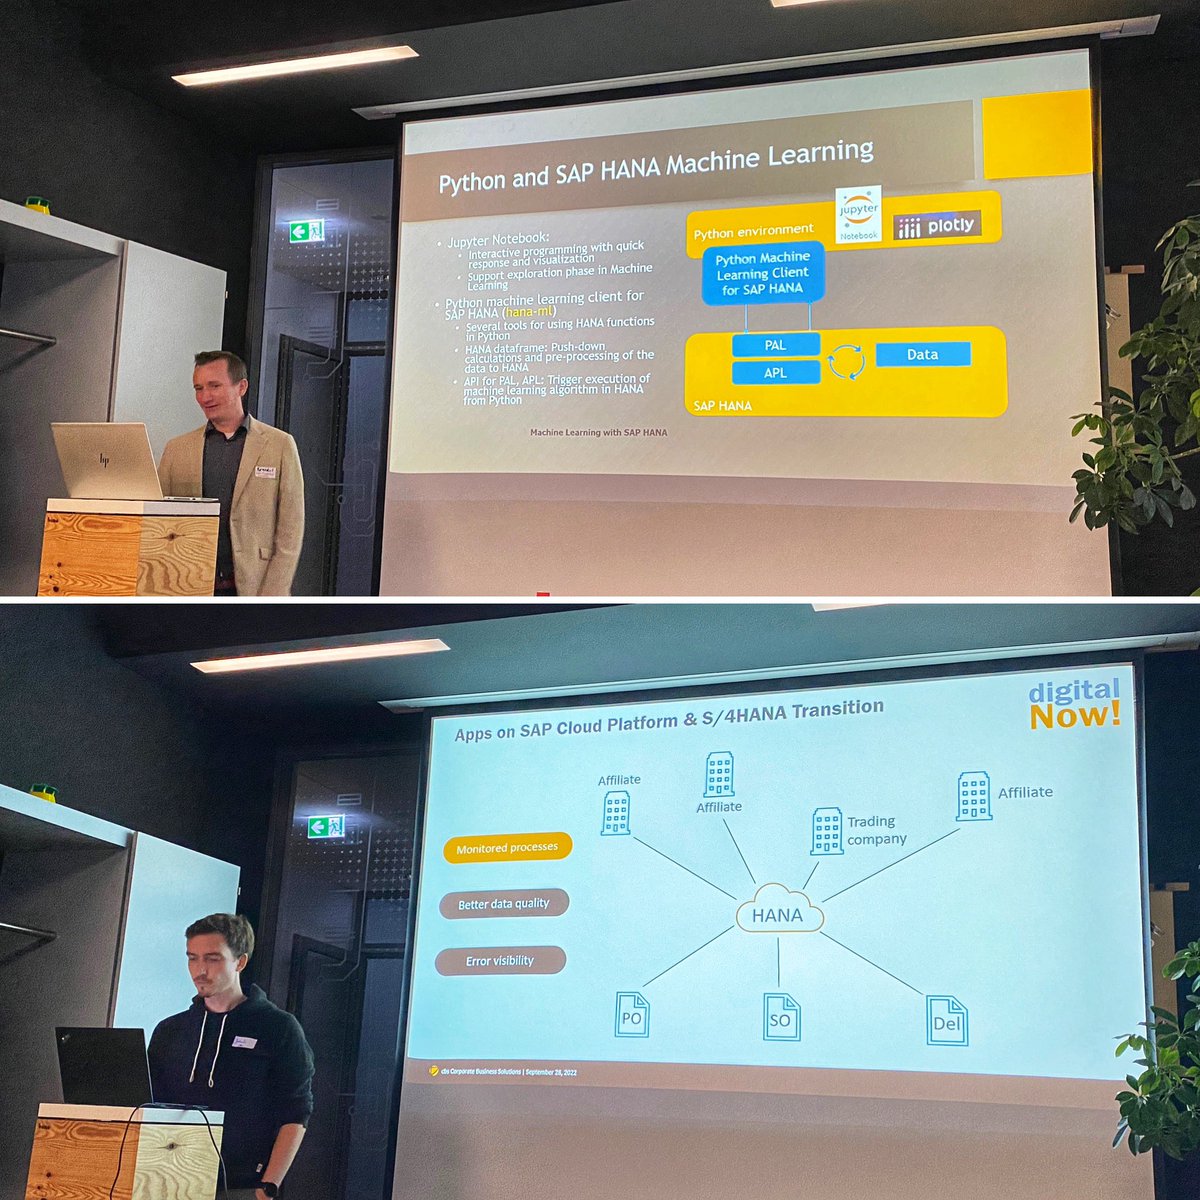 Again a great #HANATechNight with @BaurBenedict and @RufJakob as presenters. Learnt a lot about #SAPHANA #MachineLearning and #SAPHANACloud implementation projects. Thanks to @joerg_brandeis and @denny_schreber for hosting!